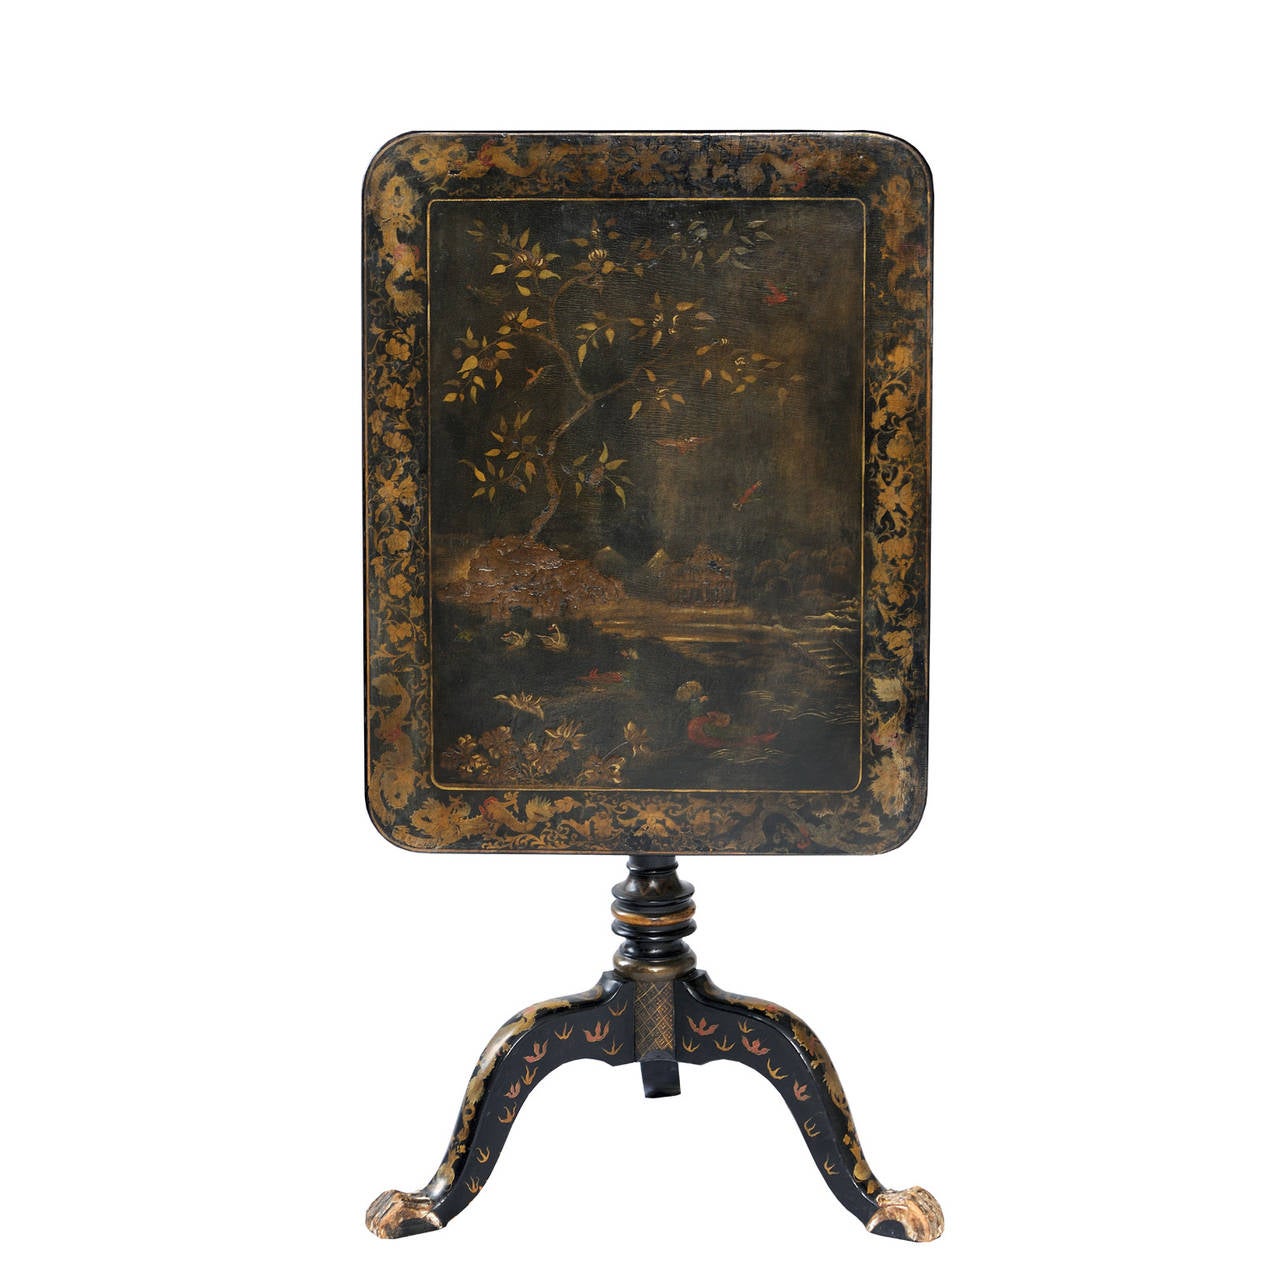 This is a very smart example of an early 19th century Regency period lacquered Chinese export tilt top side table standing on a tripod base, circa 1820.
This table features beautifully hand-painted oriental scenes.
Similar examples of this type of